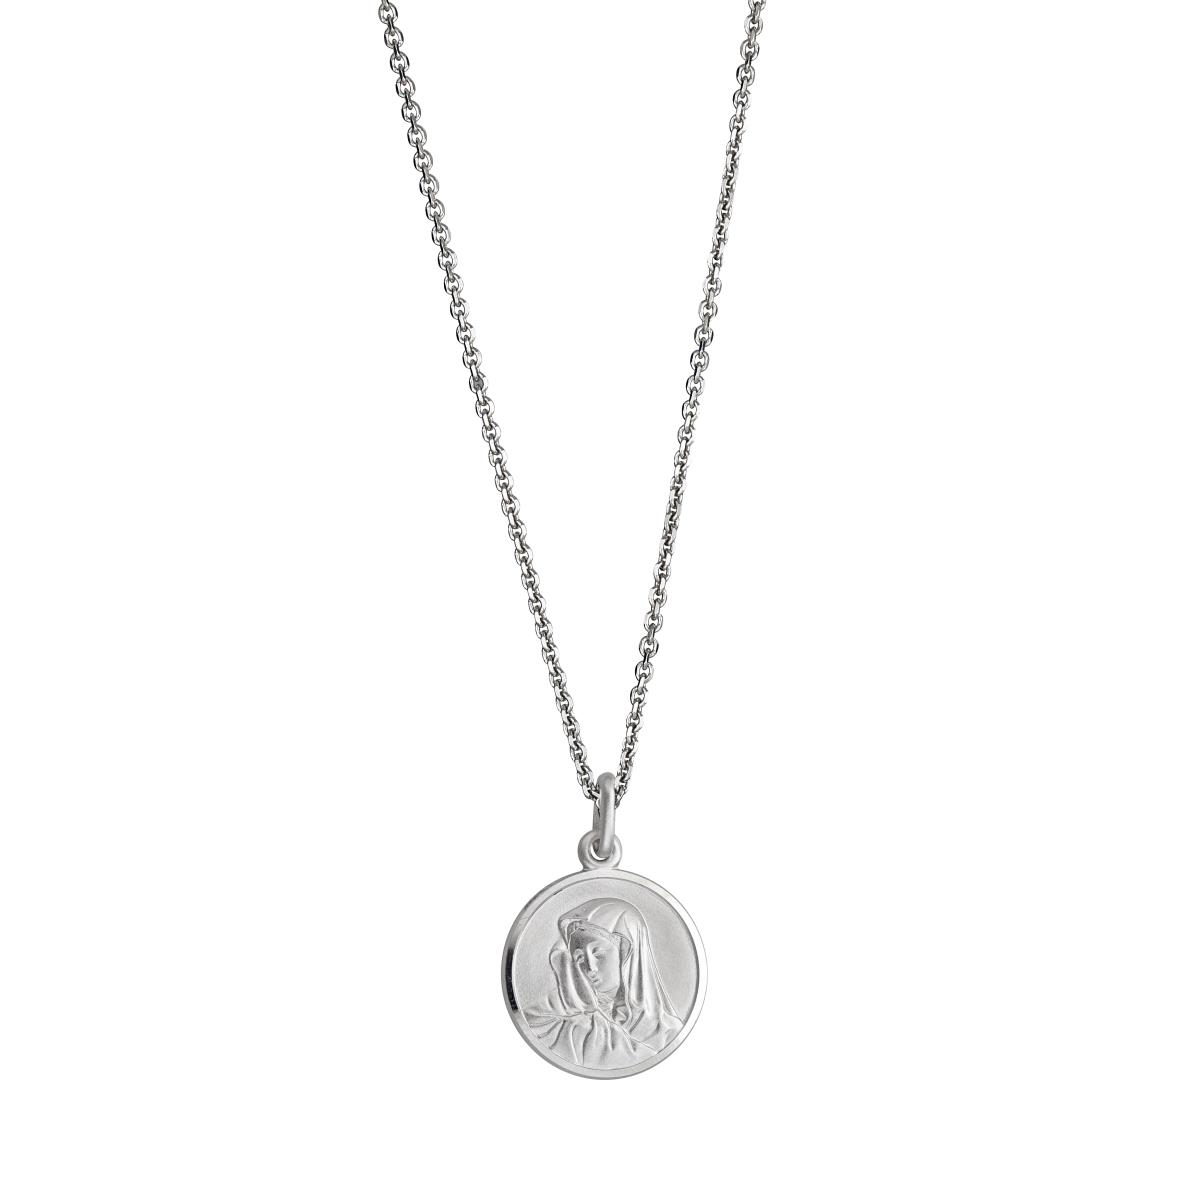 Sterling Silver 16mm Round  Virgin Mary Medal 18" Necklace